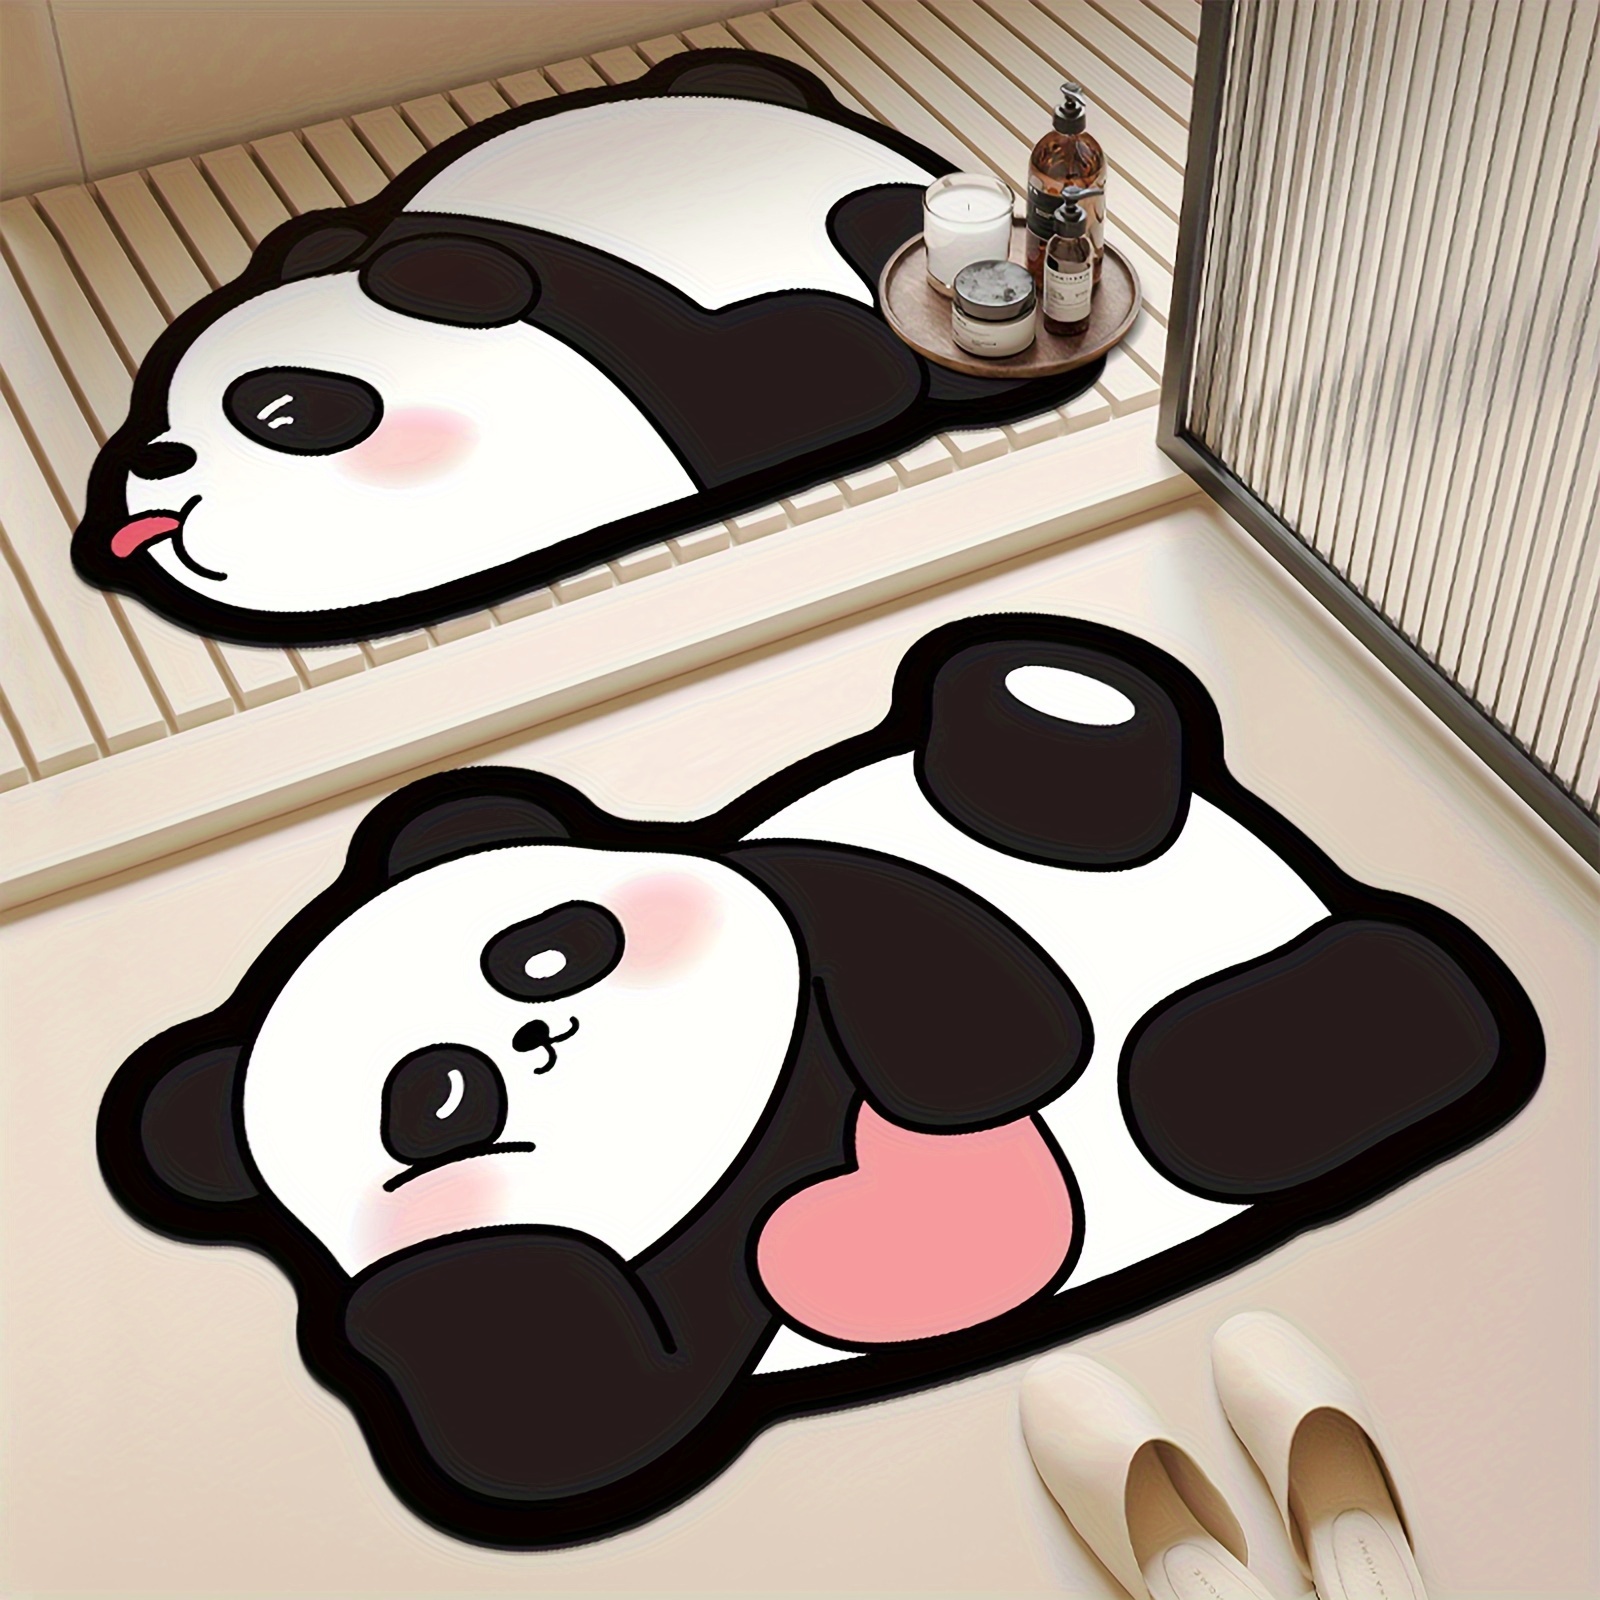 

rapid Dry" Cute Panda Quick-dry Bath Mat - Non-slip, Super Absorbent Diatomaceous Earth Rug For Bathroom & Outdoor Use